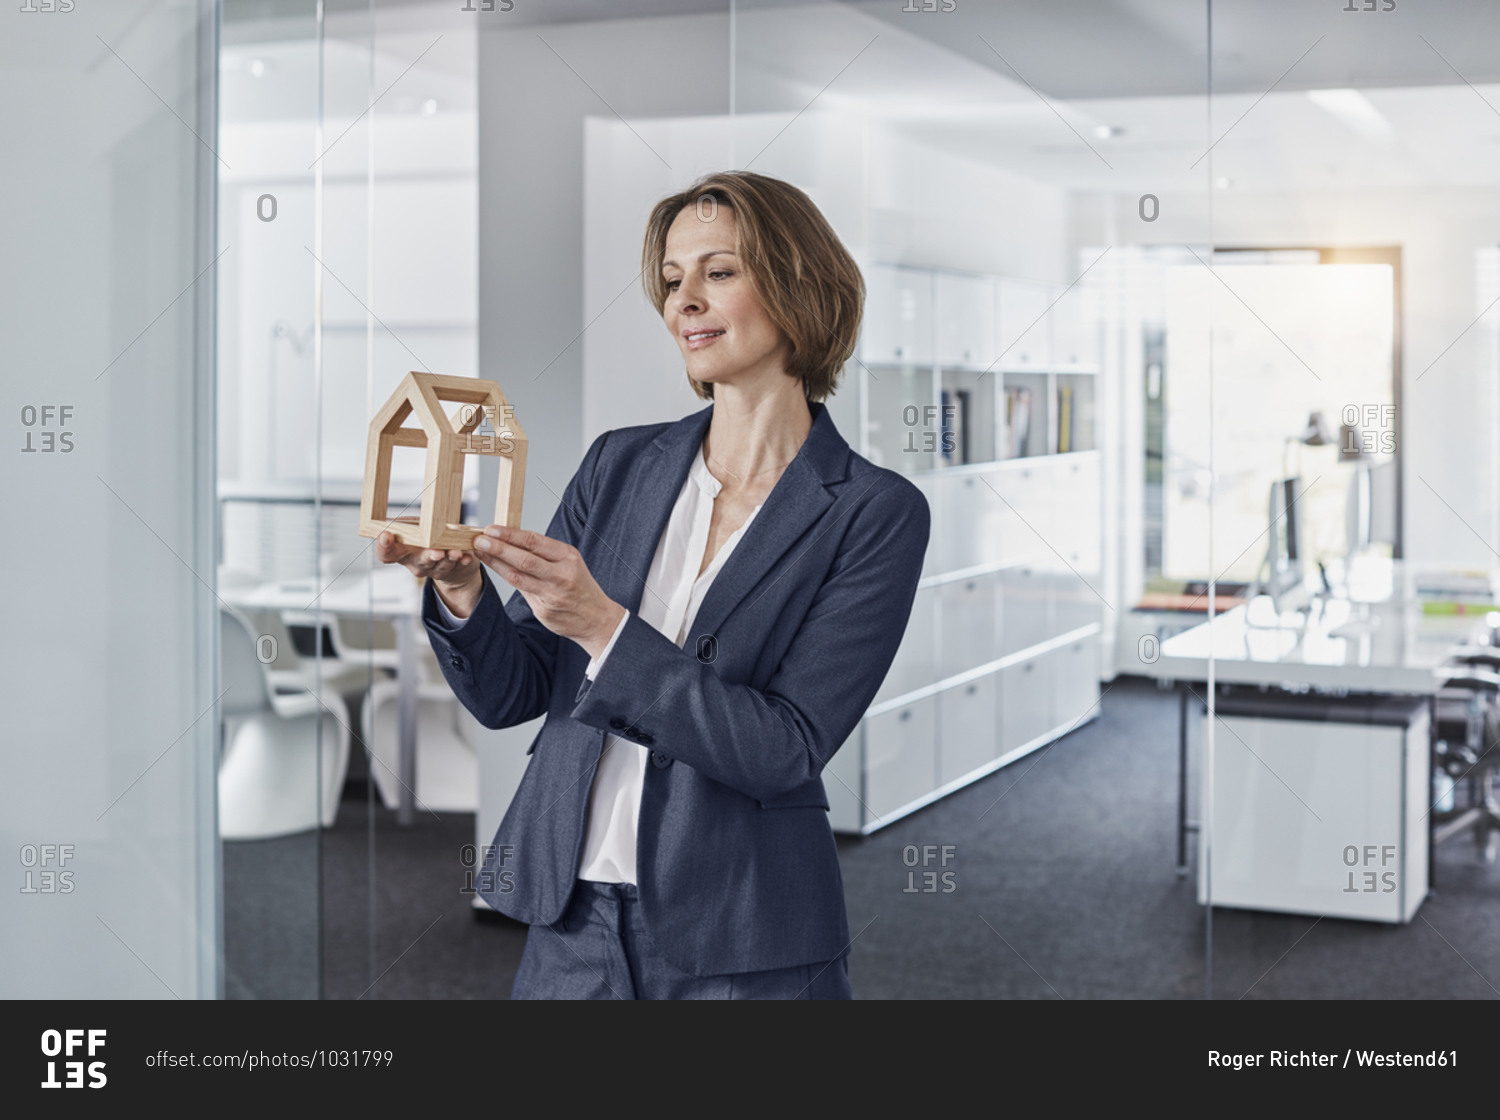 Smiling businesswoman looking at architectural model in office